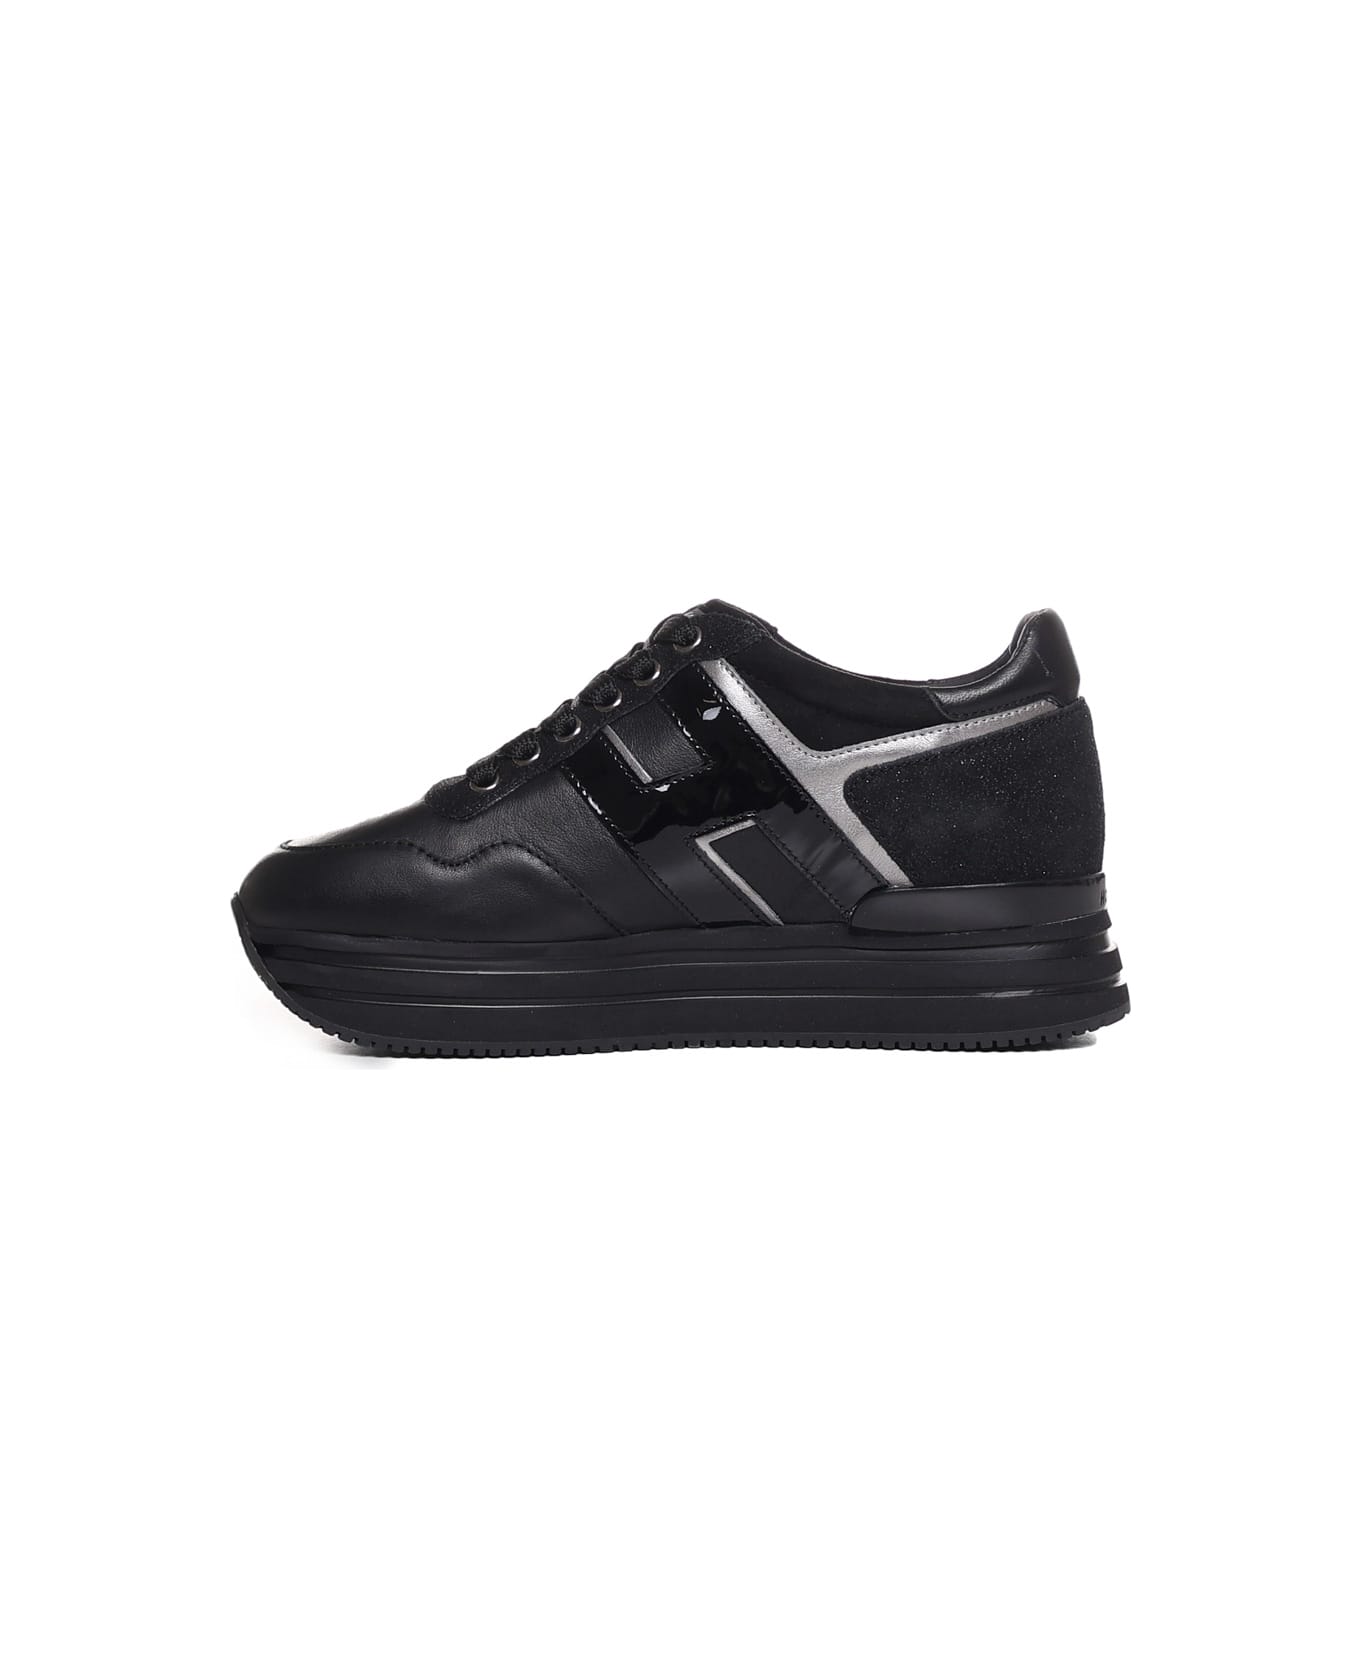 Hogan Midi Platform Sneakers In Leather With Glitter Inserts - Black